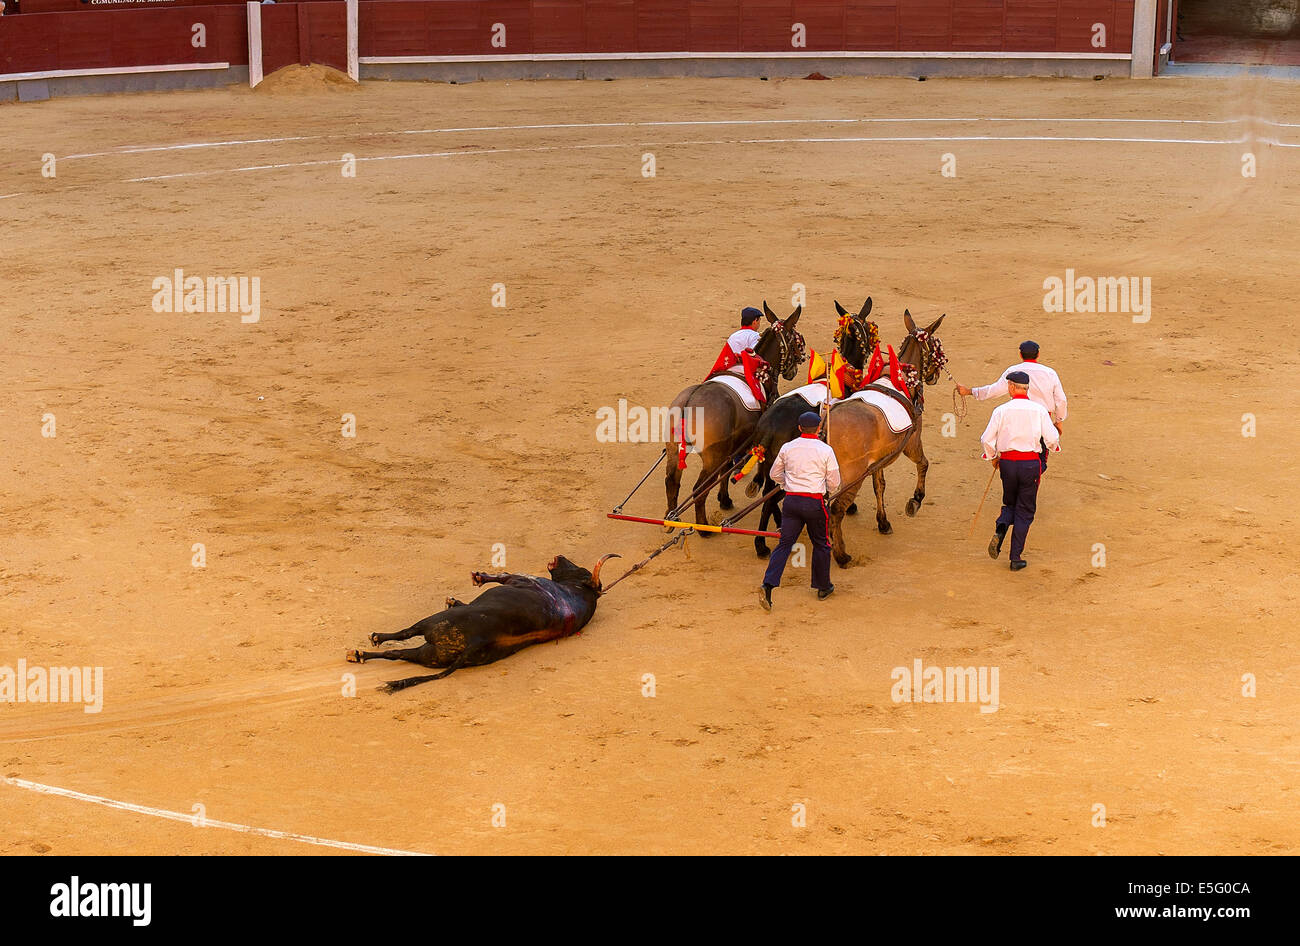 The dead bull being carried by the operators of the bullring Stock Photo